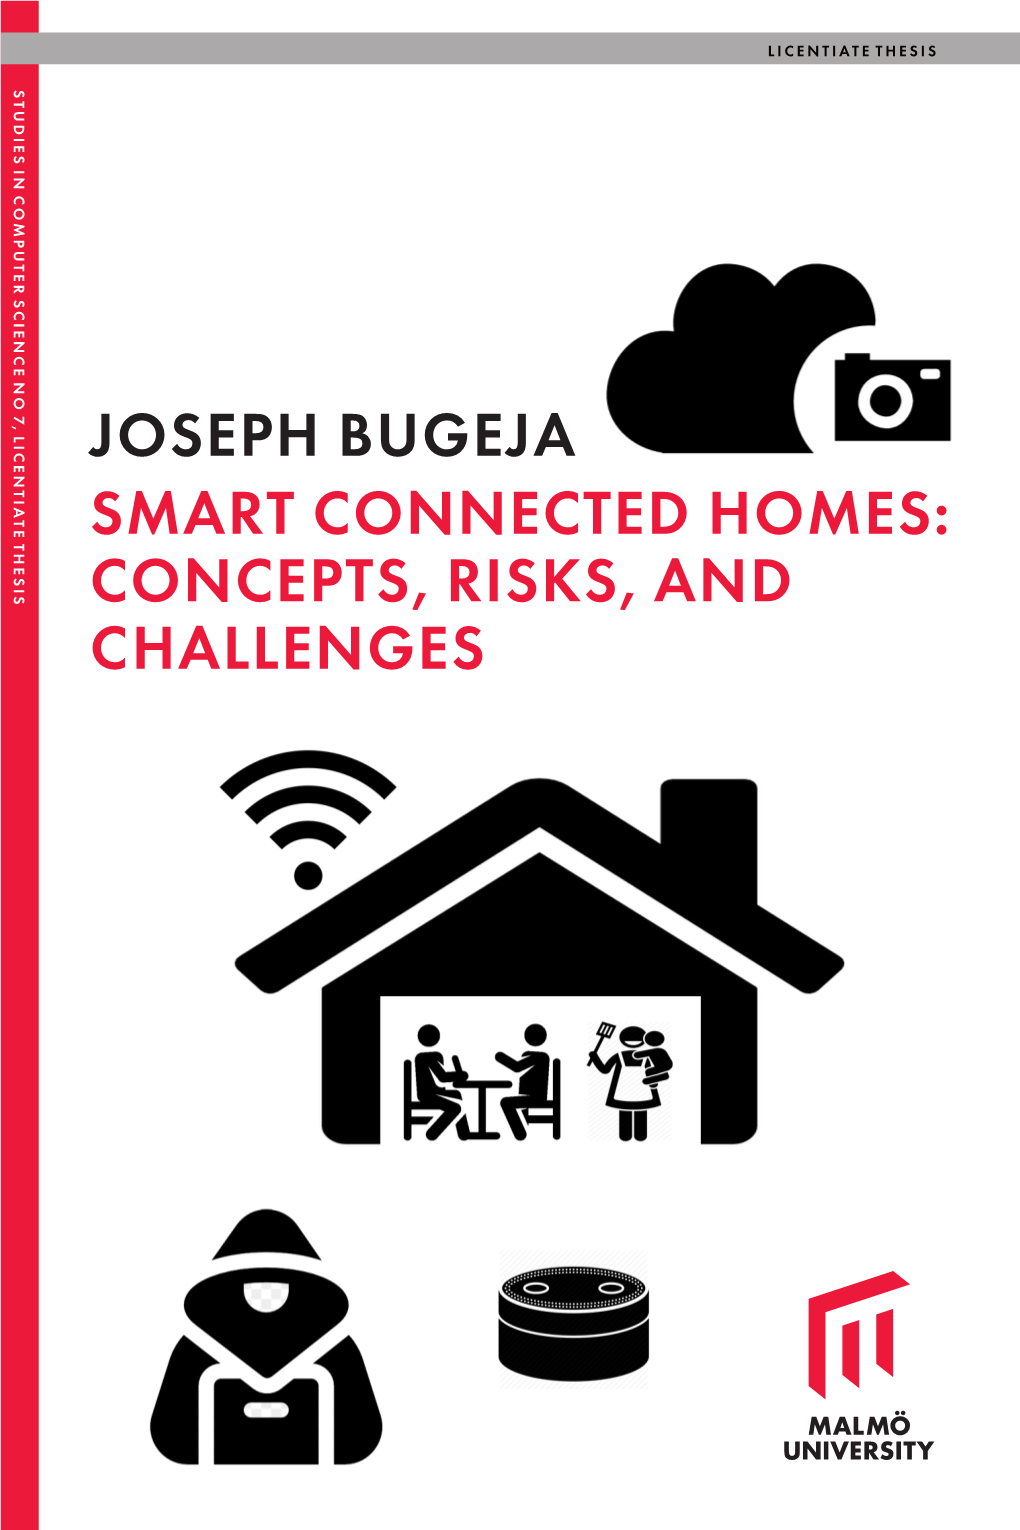 Joseph Bugeja Smart Connected Homes: Concepts, Risks, and Challenges